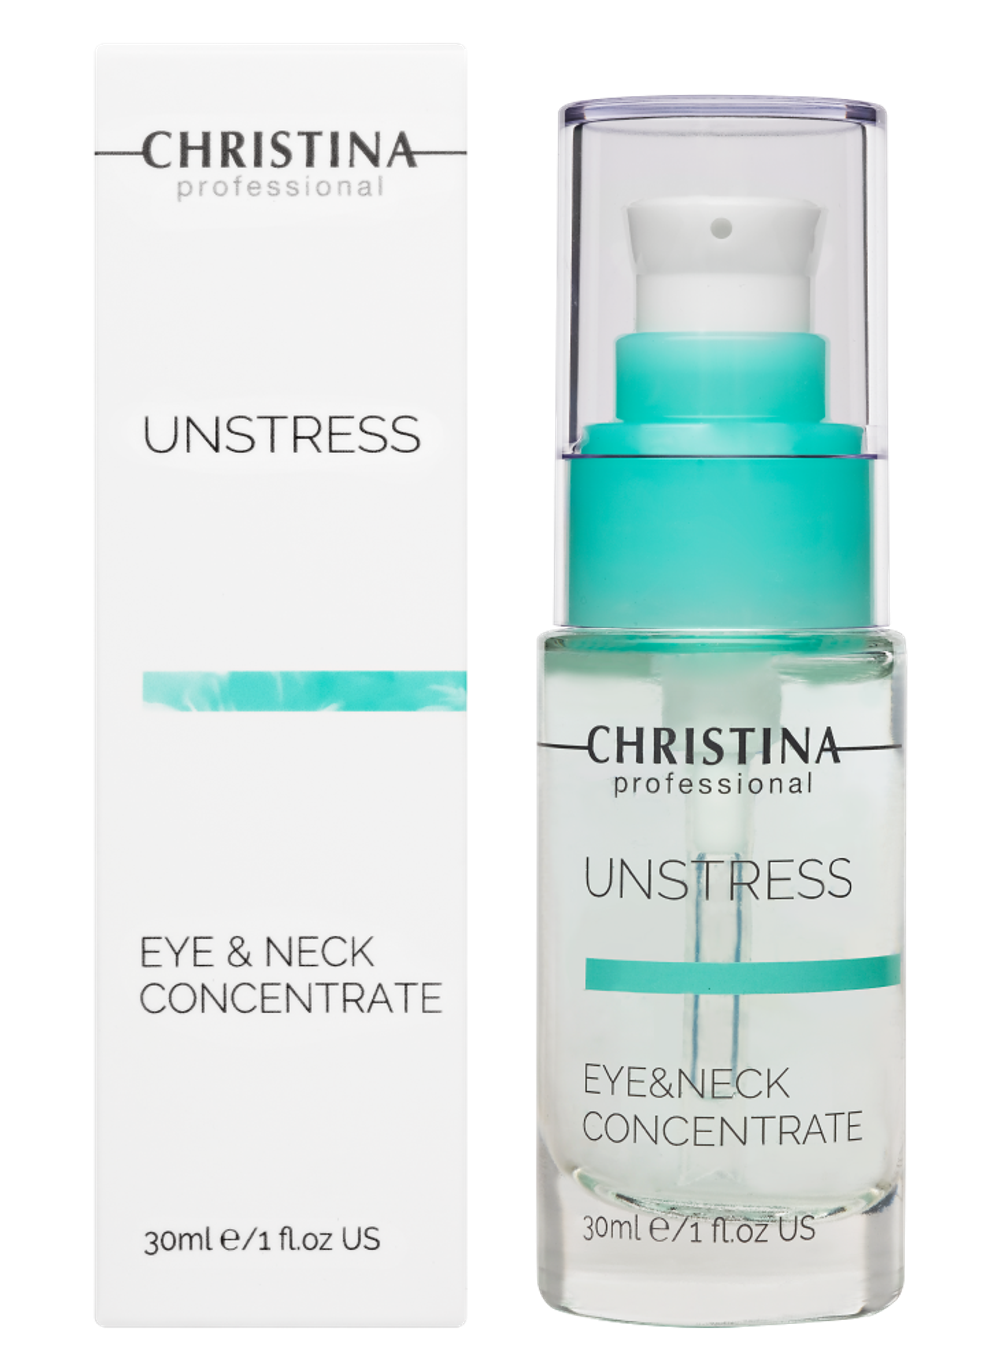 CHRISTINA Unstress Eye & Neck Concentrate